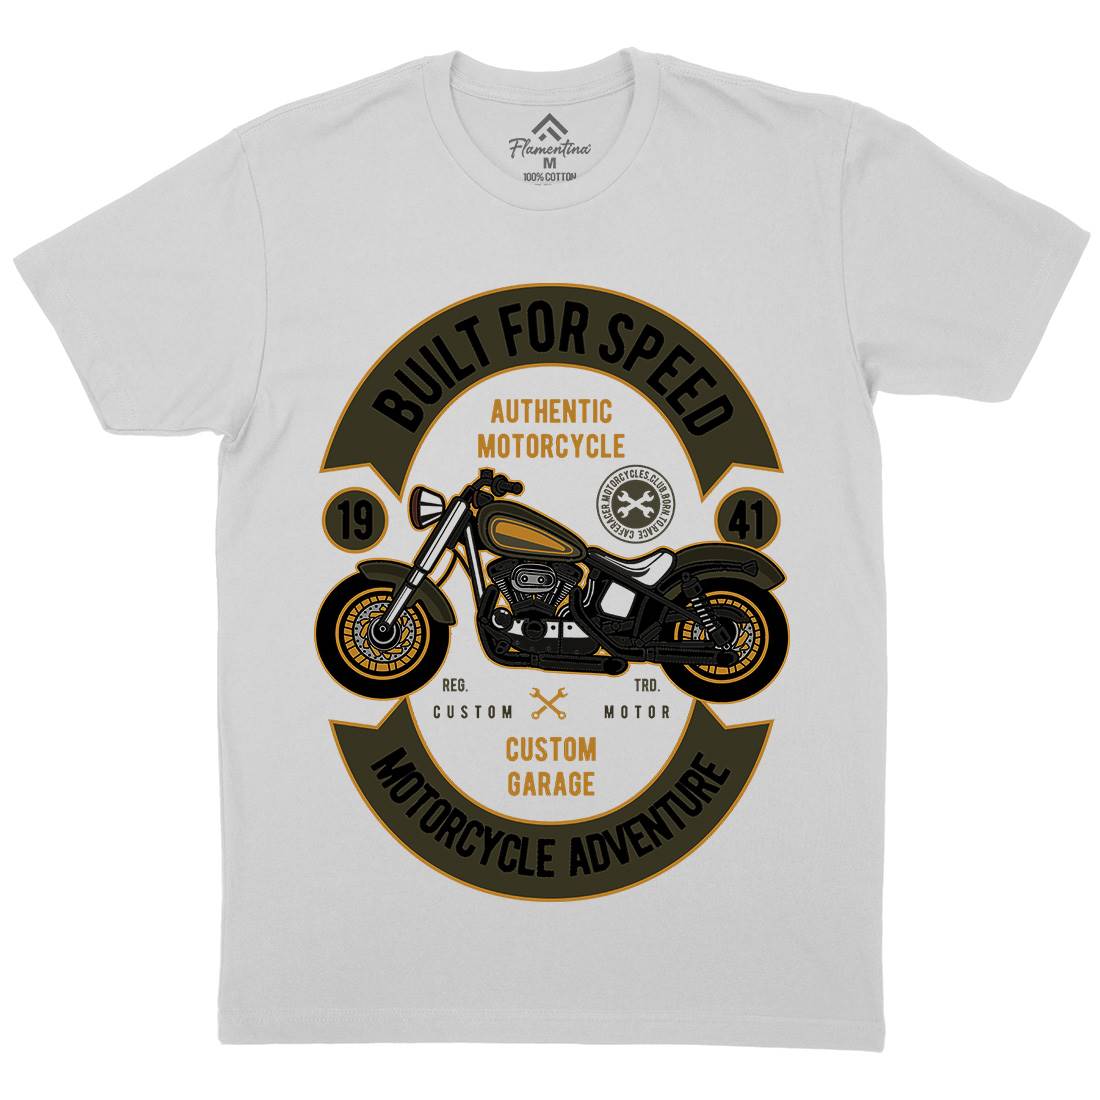 Built For Speed Mens Crew Neck T-Shirt Motorcycles D512